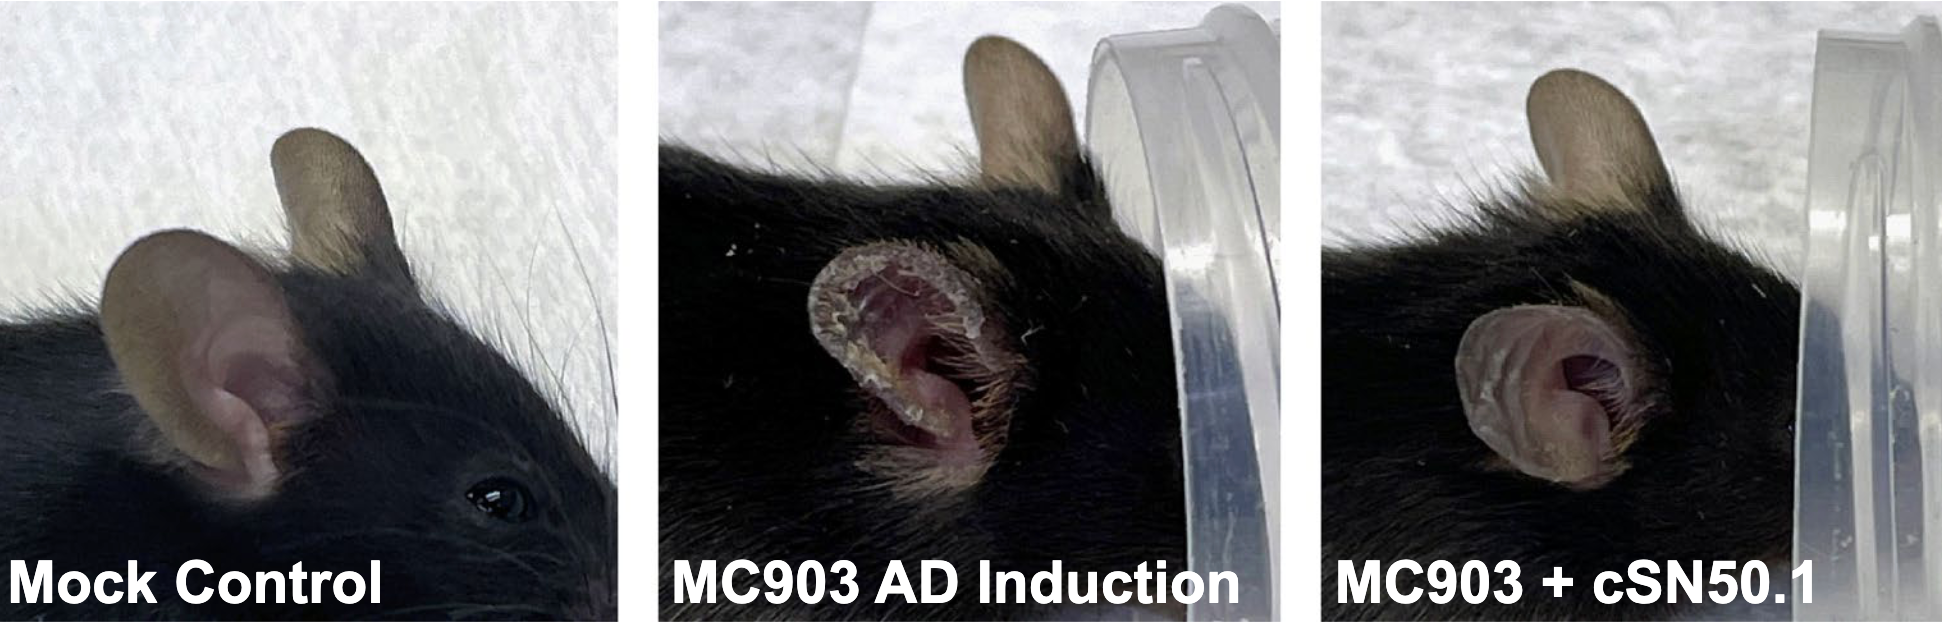 Representative pictures of mice from the mock control group were taken at the end of experiment and from the cSN50.1-treated group immediately before (MC903 AD Induction) and after NTCI treatment (MC903 + cSN50.1).